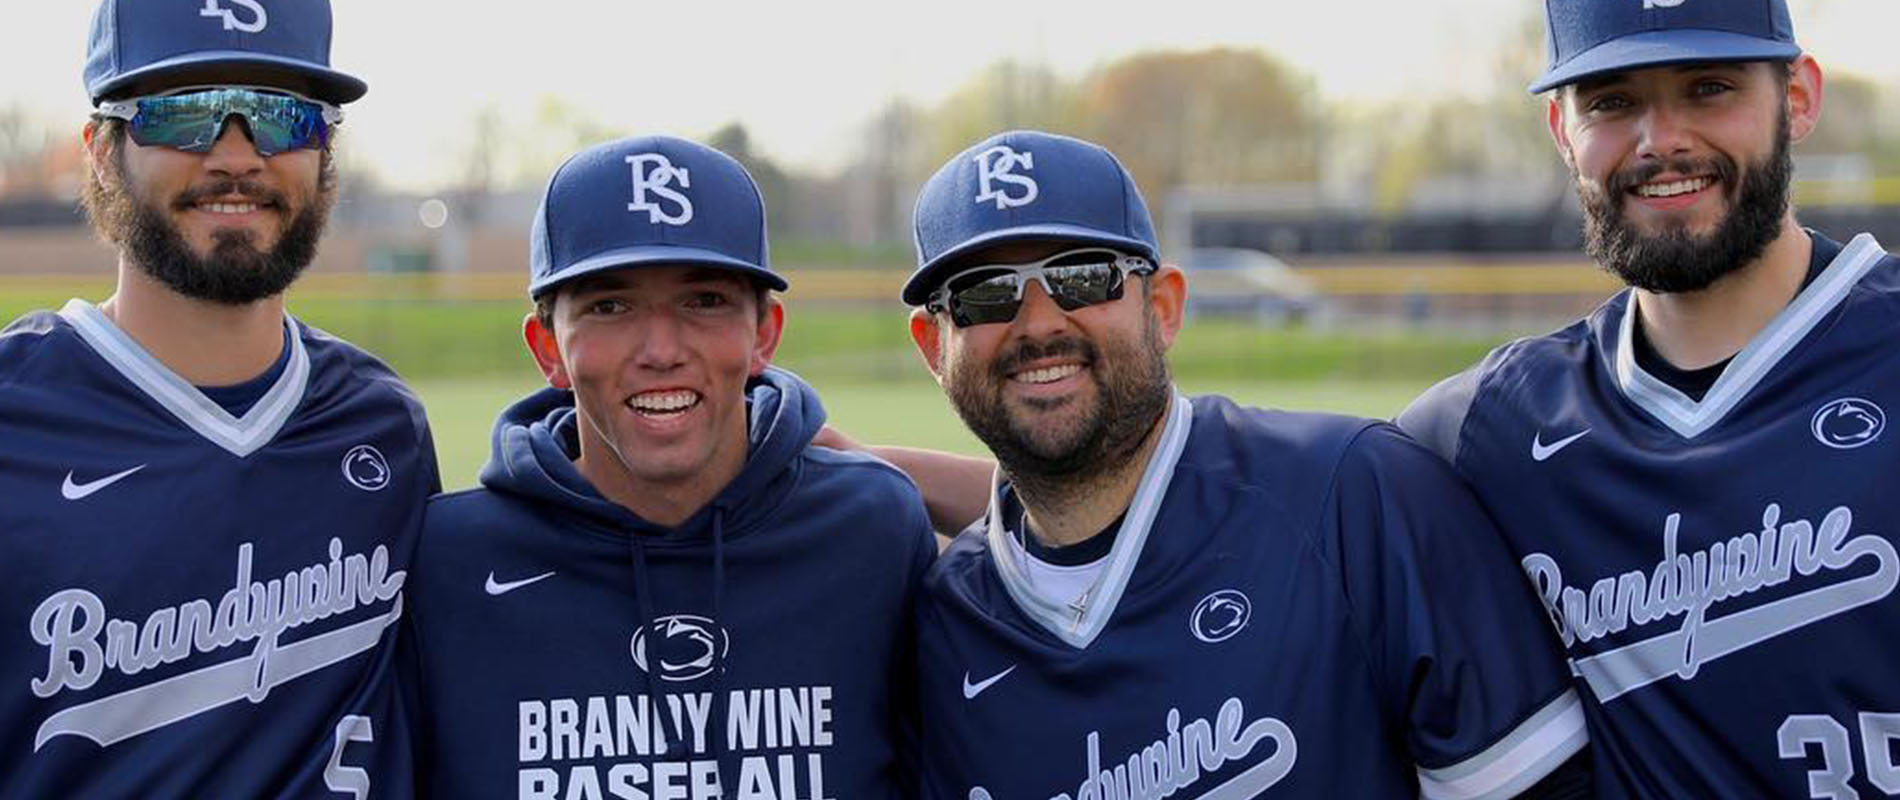 Penn State Brandywine's Eddie Caufield (second from left) poses with coaches and teammates.